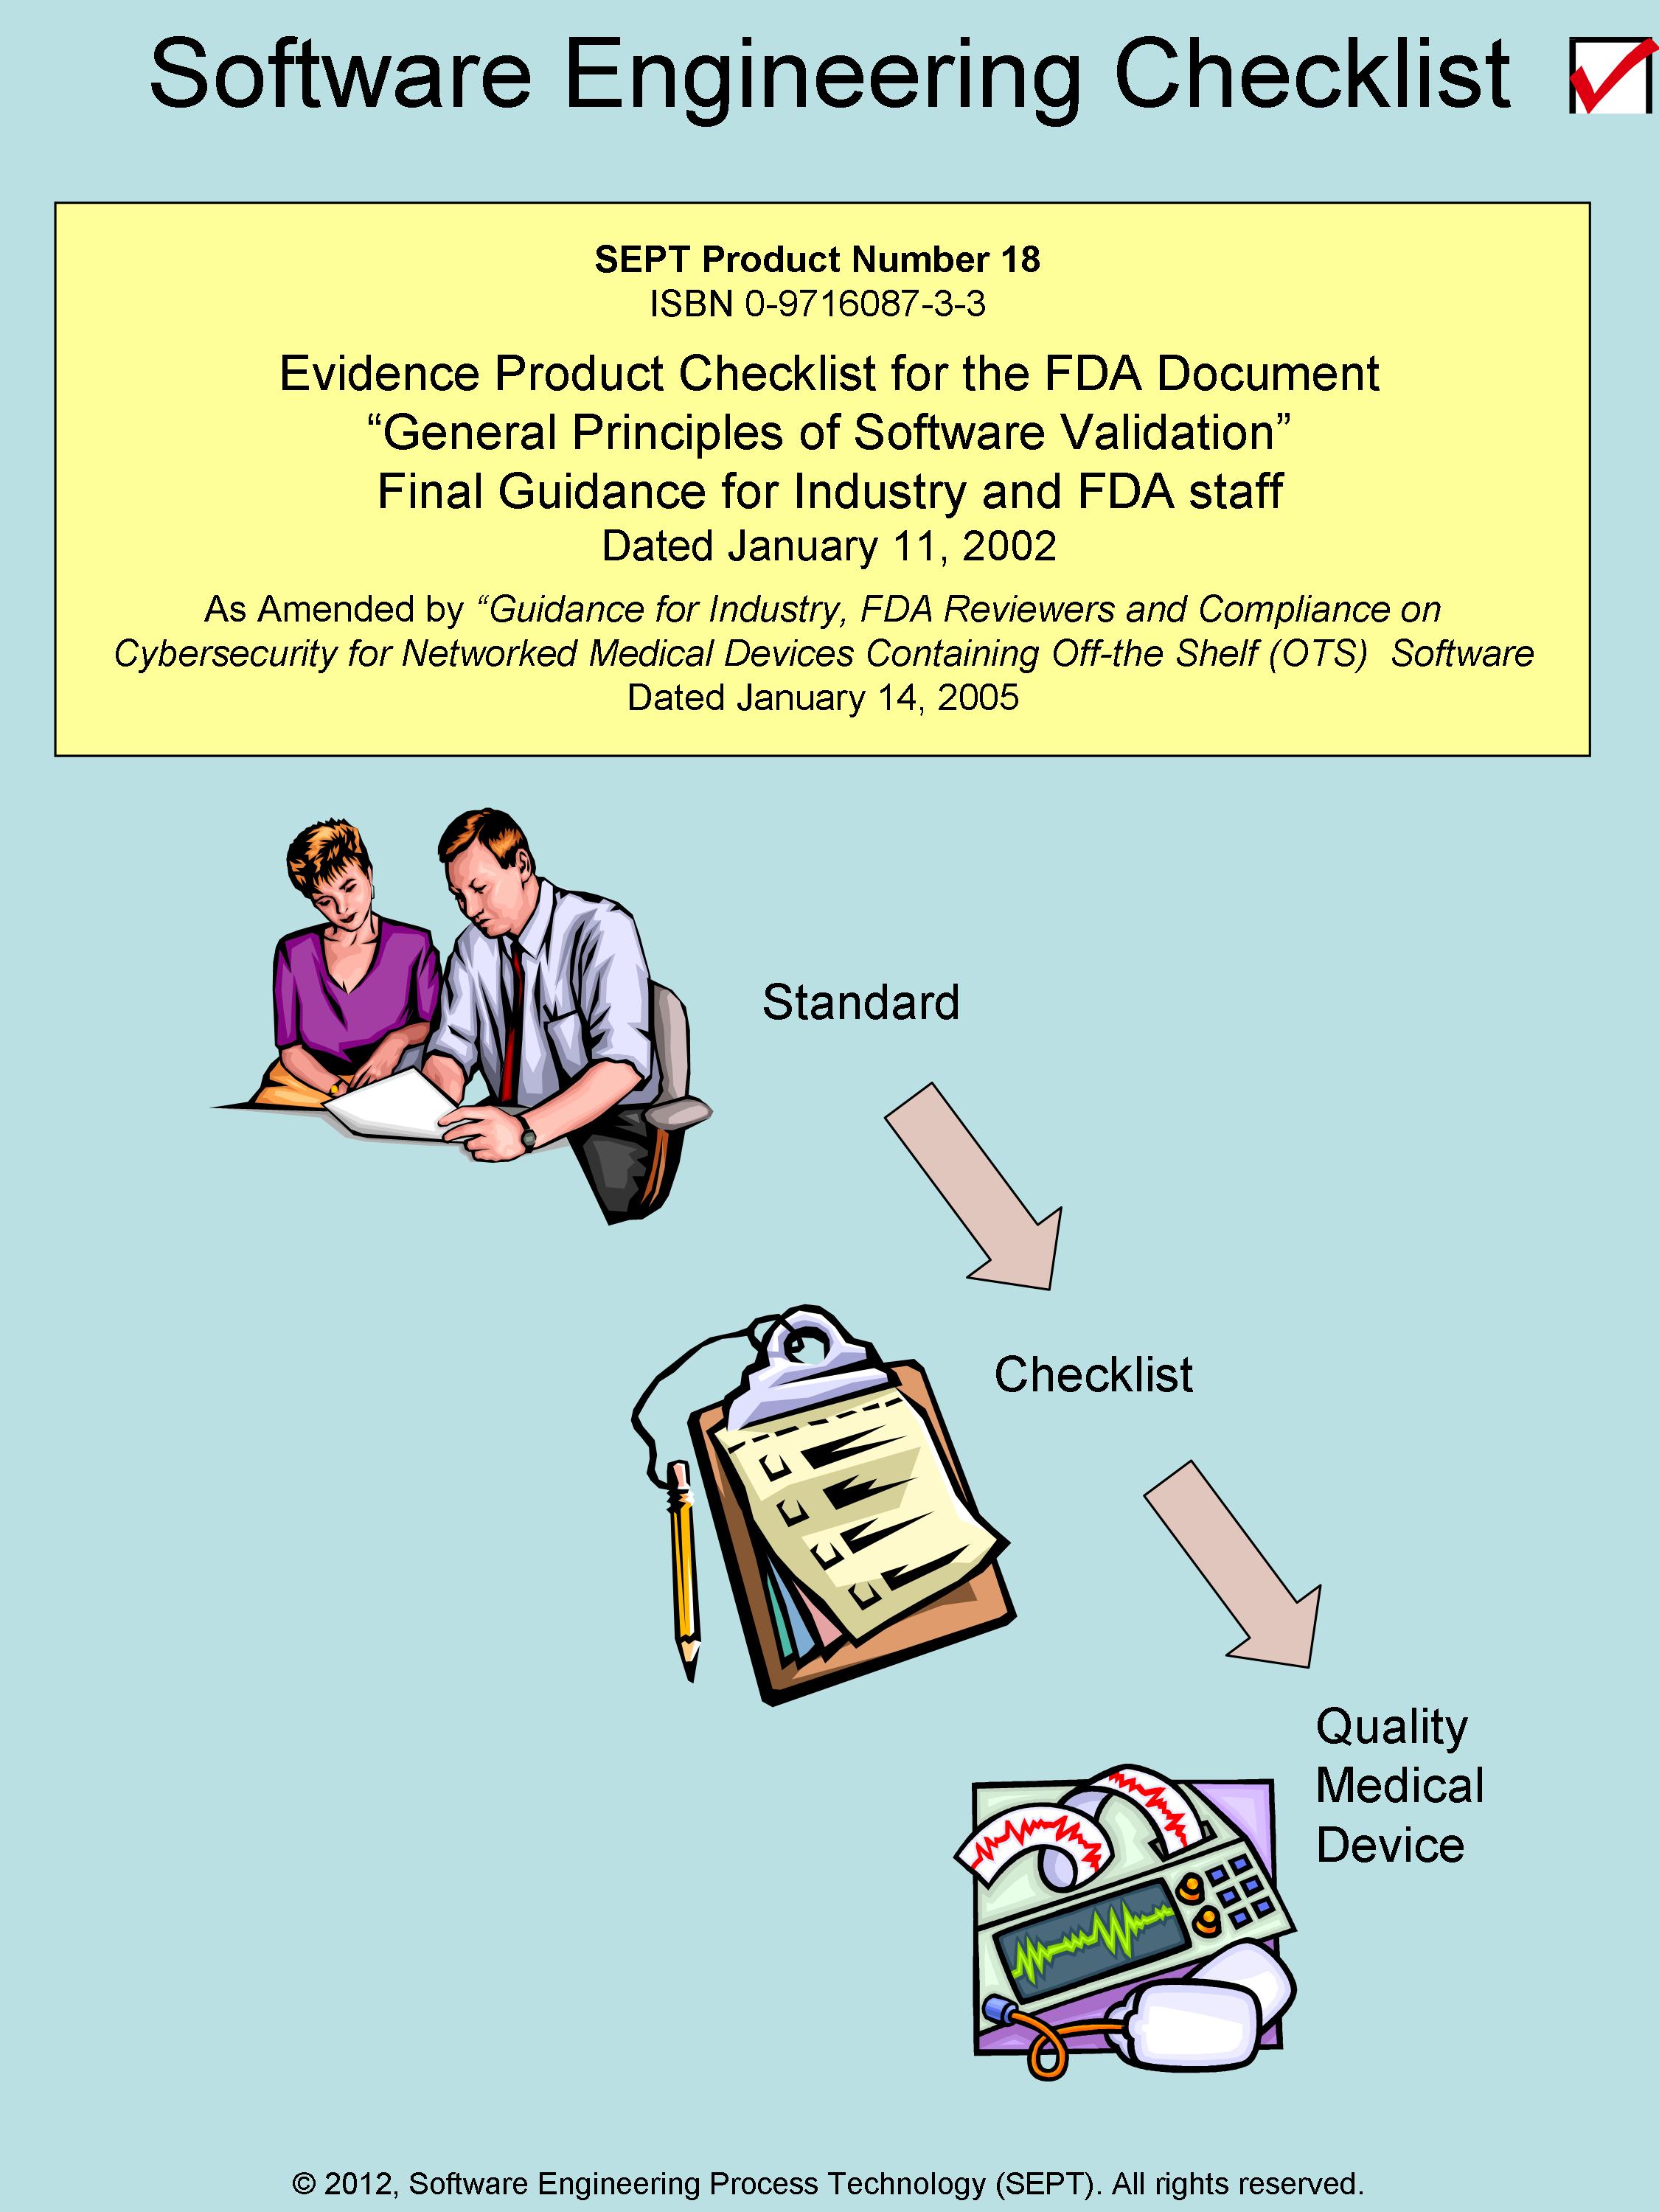 FDA, General Principles of Software Validation Final Guidance for Industry and FDA Staff (Release date January 11, 2002)